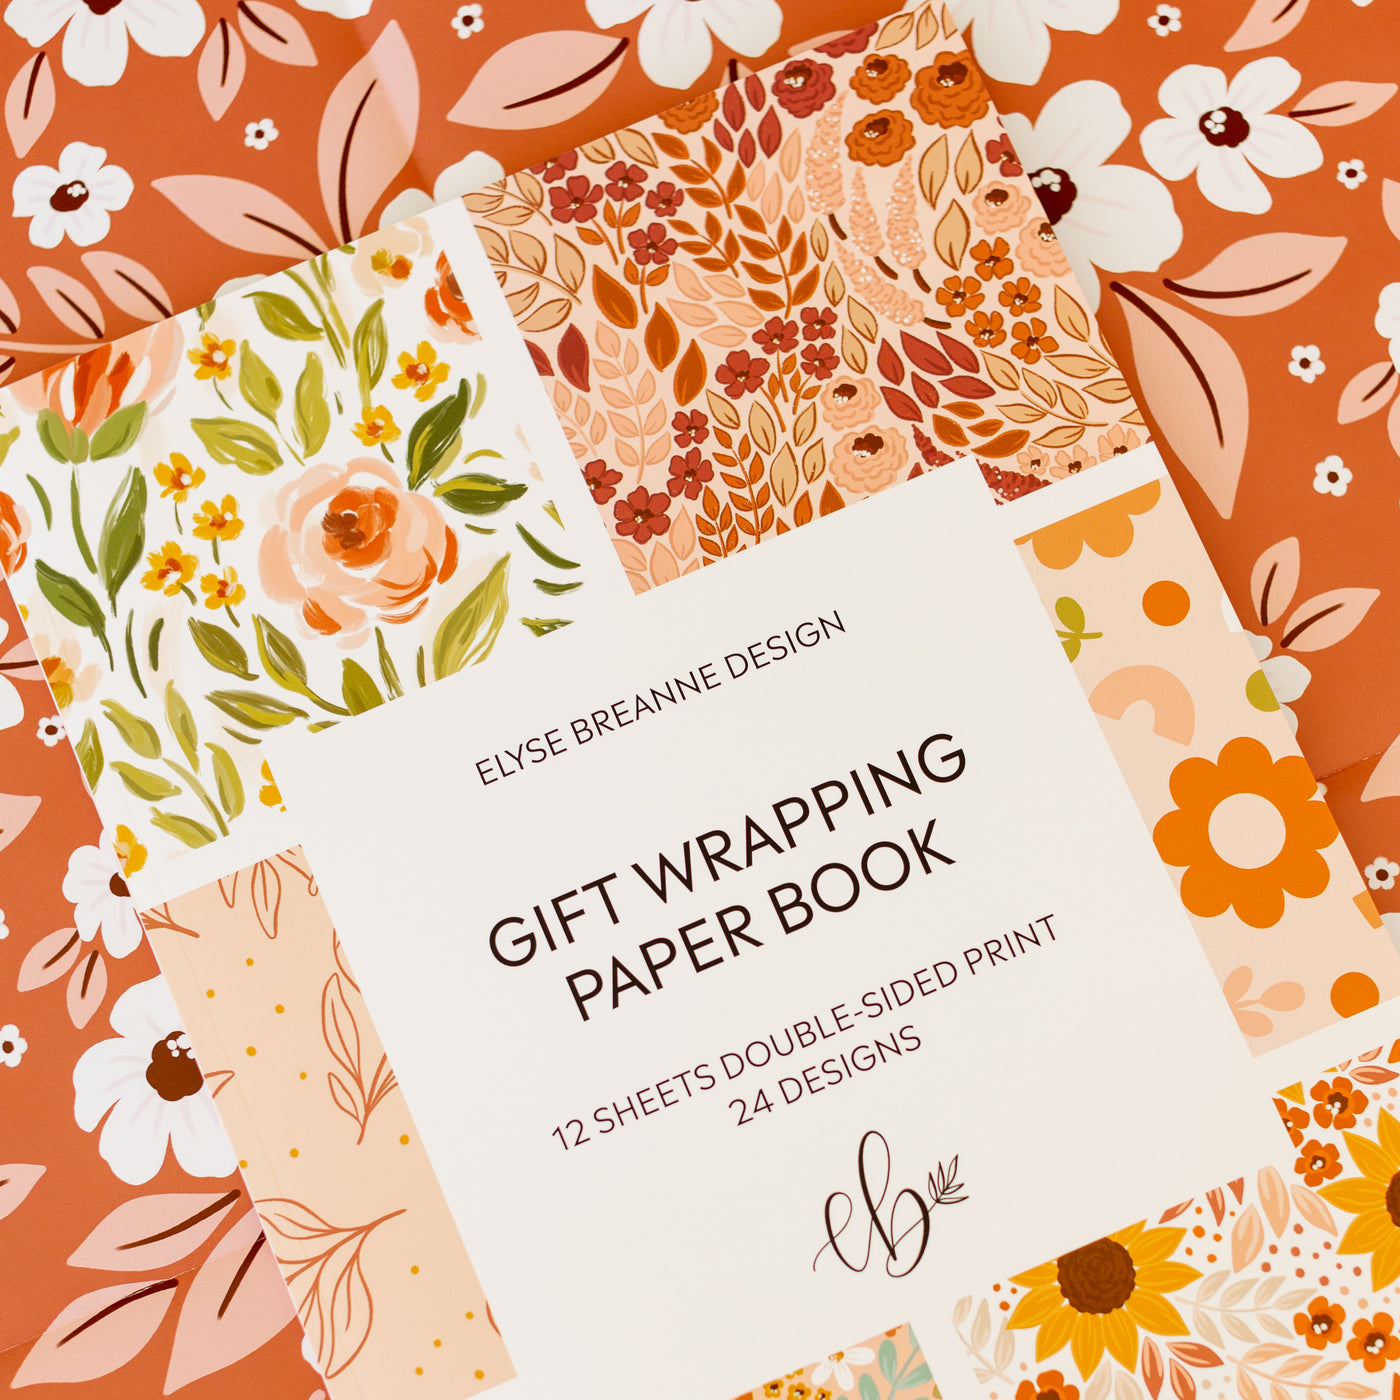 Wrapping Paper Book – Elyse Breanne Design